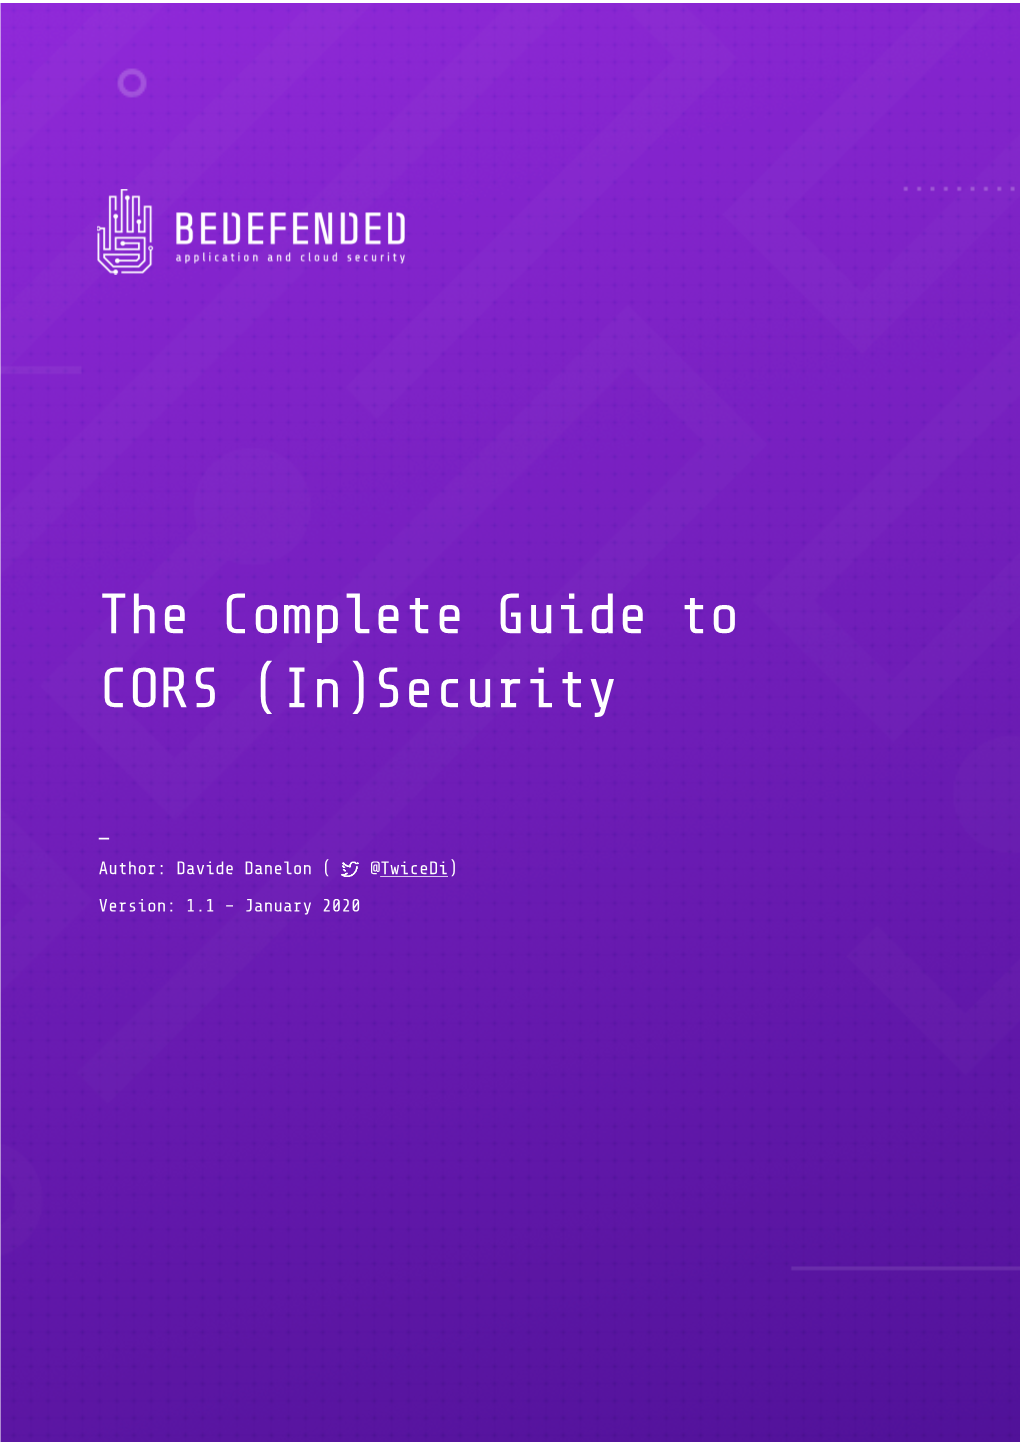 The Complete Guide to CORS (In)Security